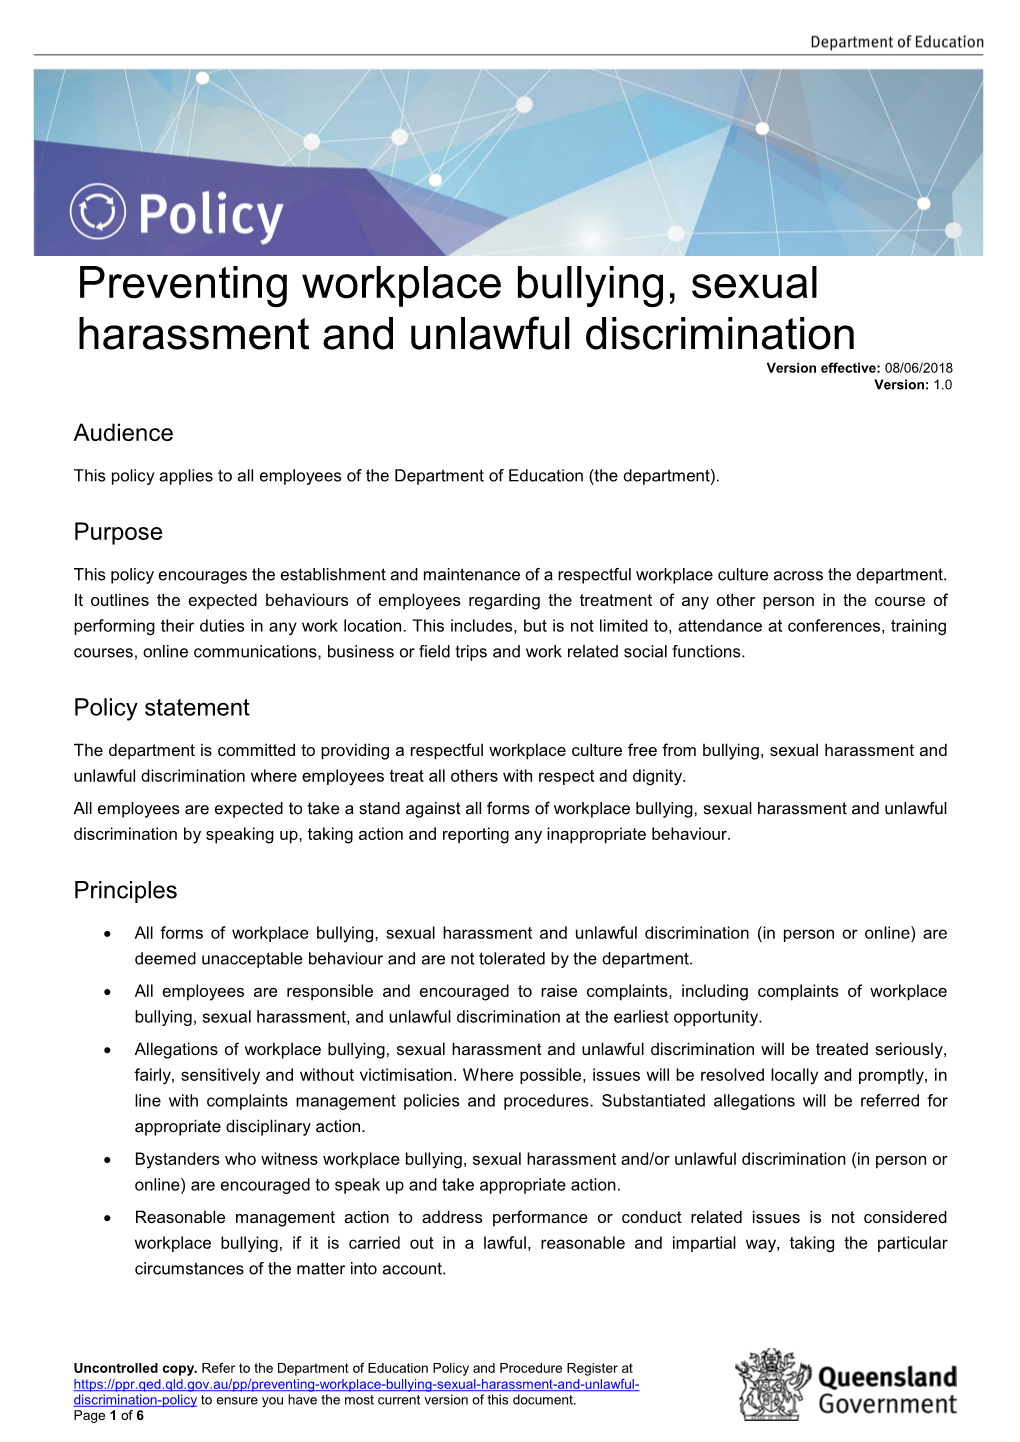 Preventing Workplace Bullying, Sexual Harassment and Unlawful